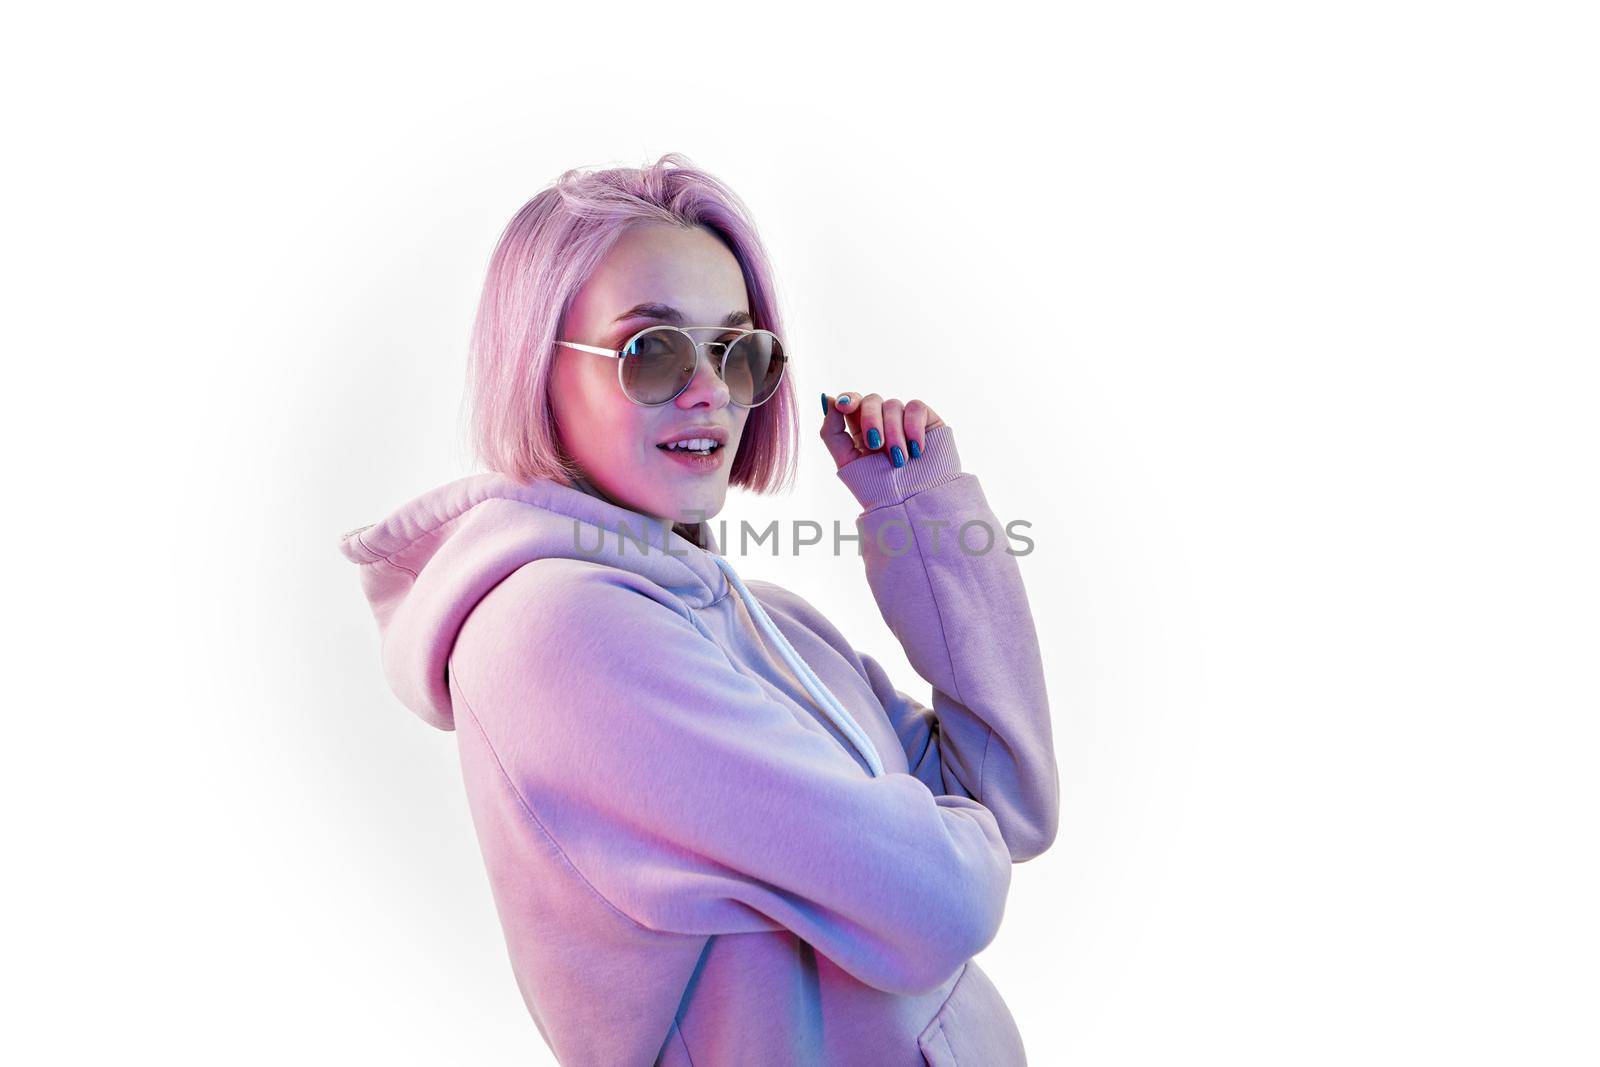 Woman with pink hair in sunglasses on white background by Demkat